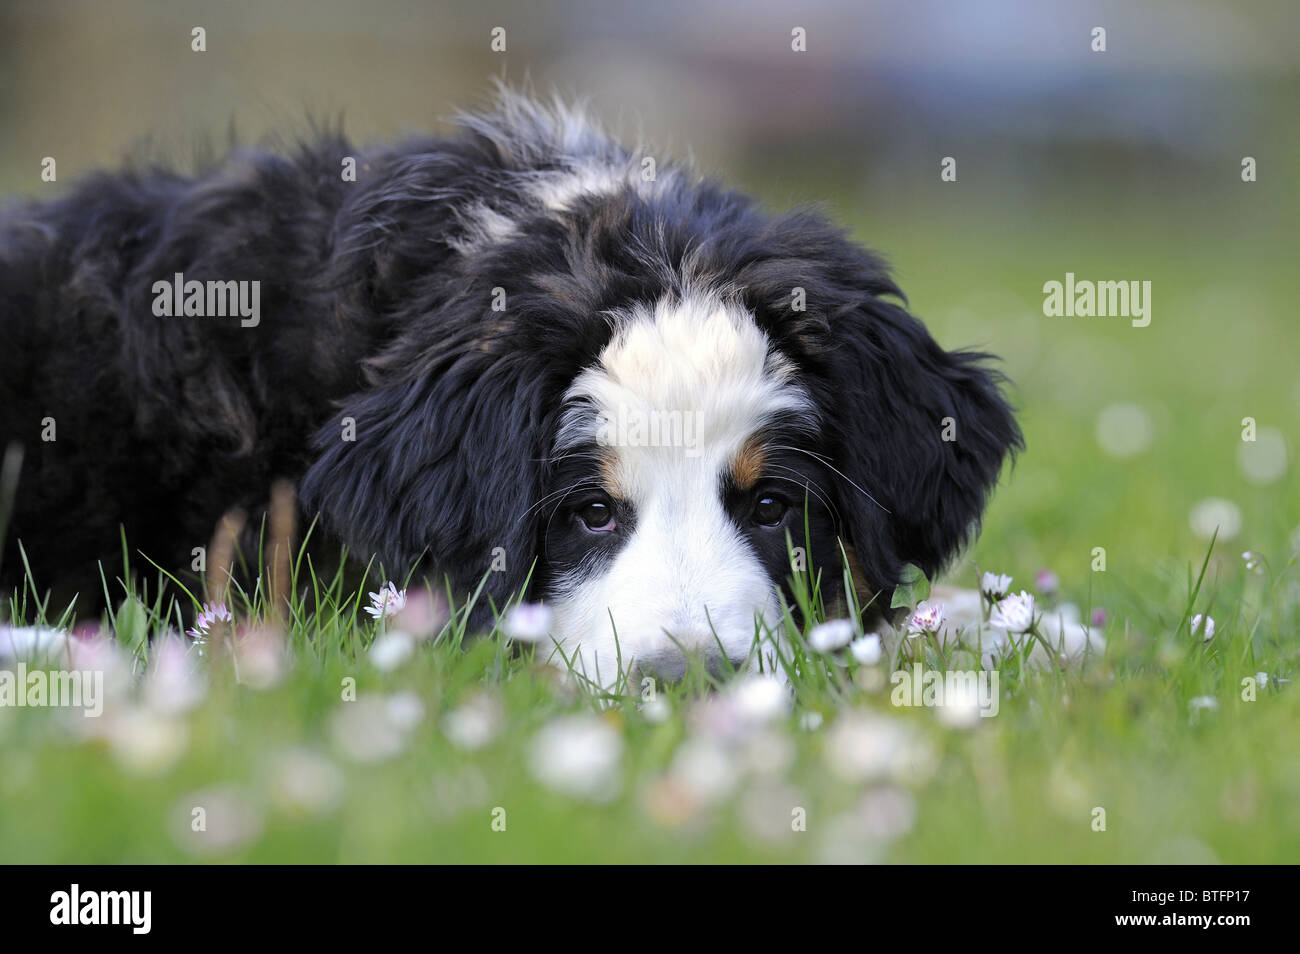 Bernese Mountain Dog (Canis lupus familiaris). Puppy lying in a meadow while looking into the camera. Stock Photo